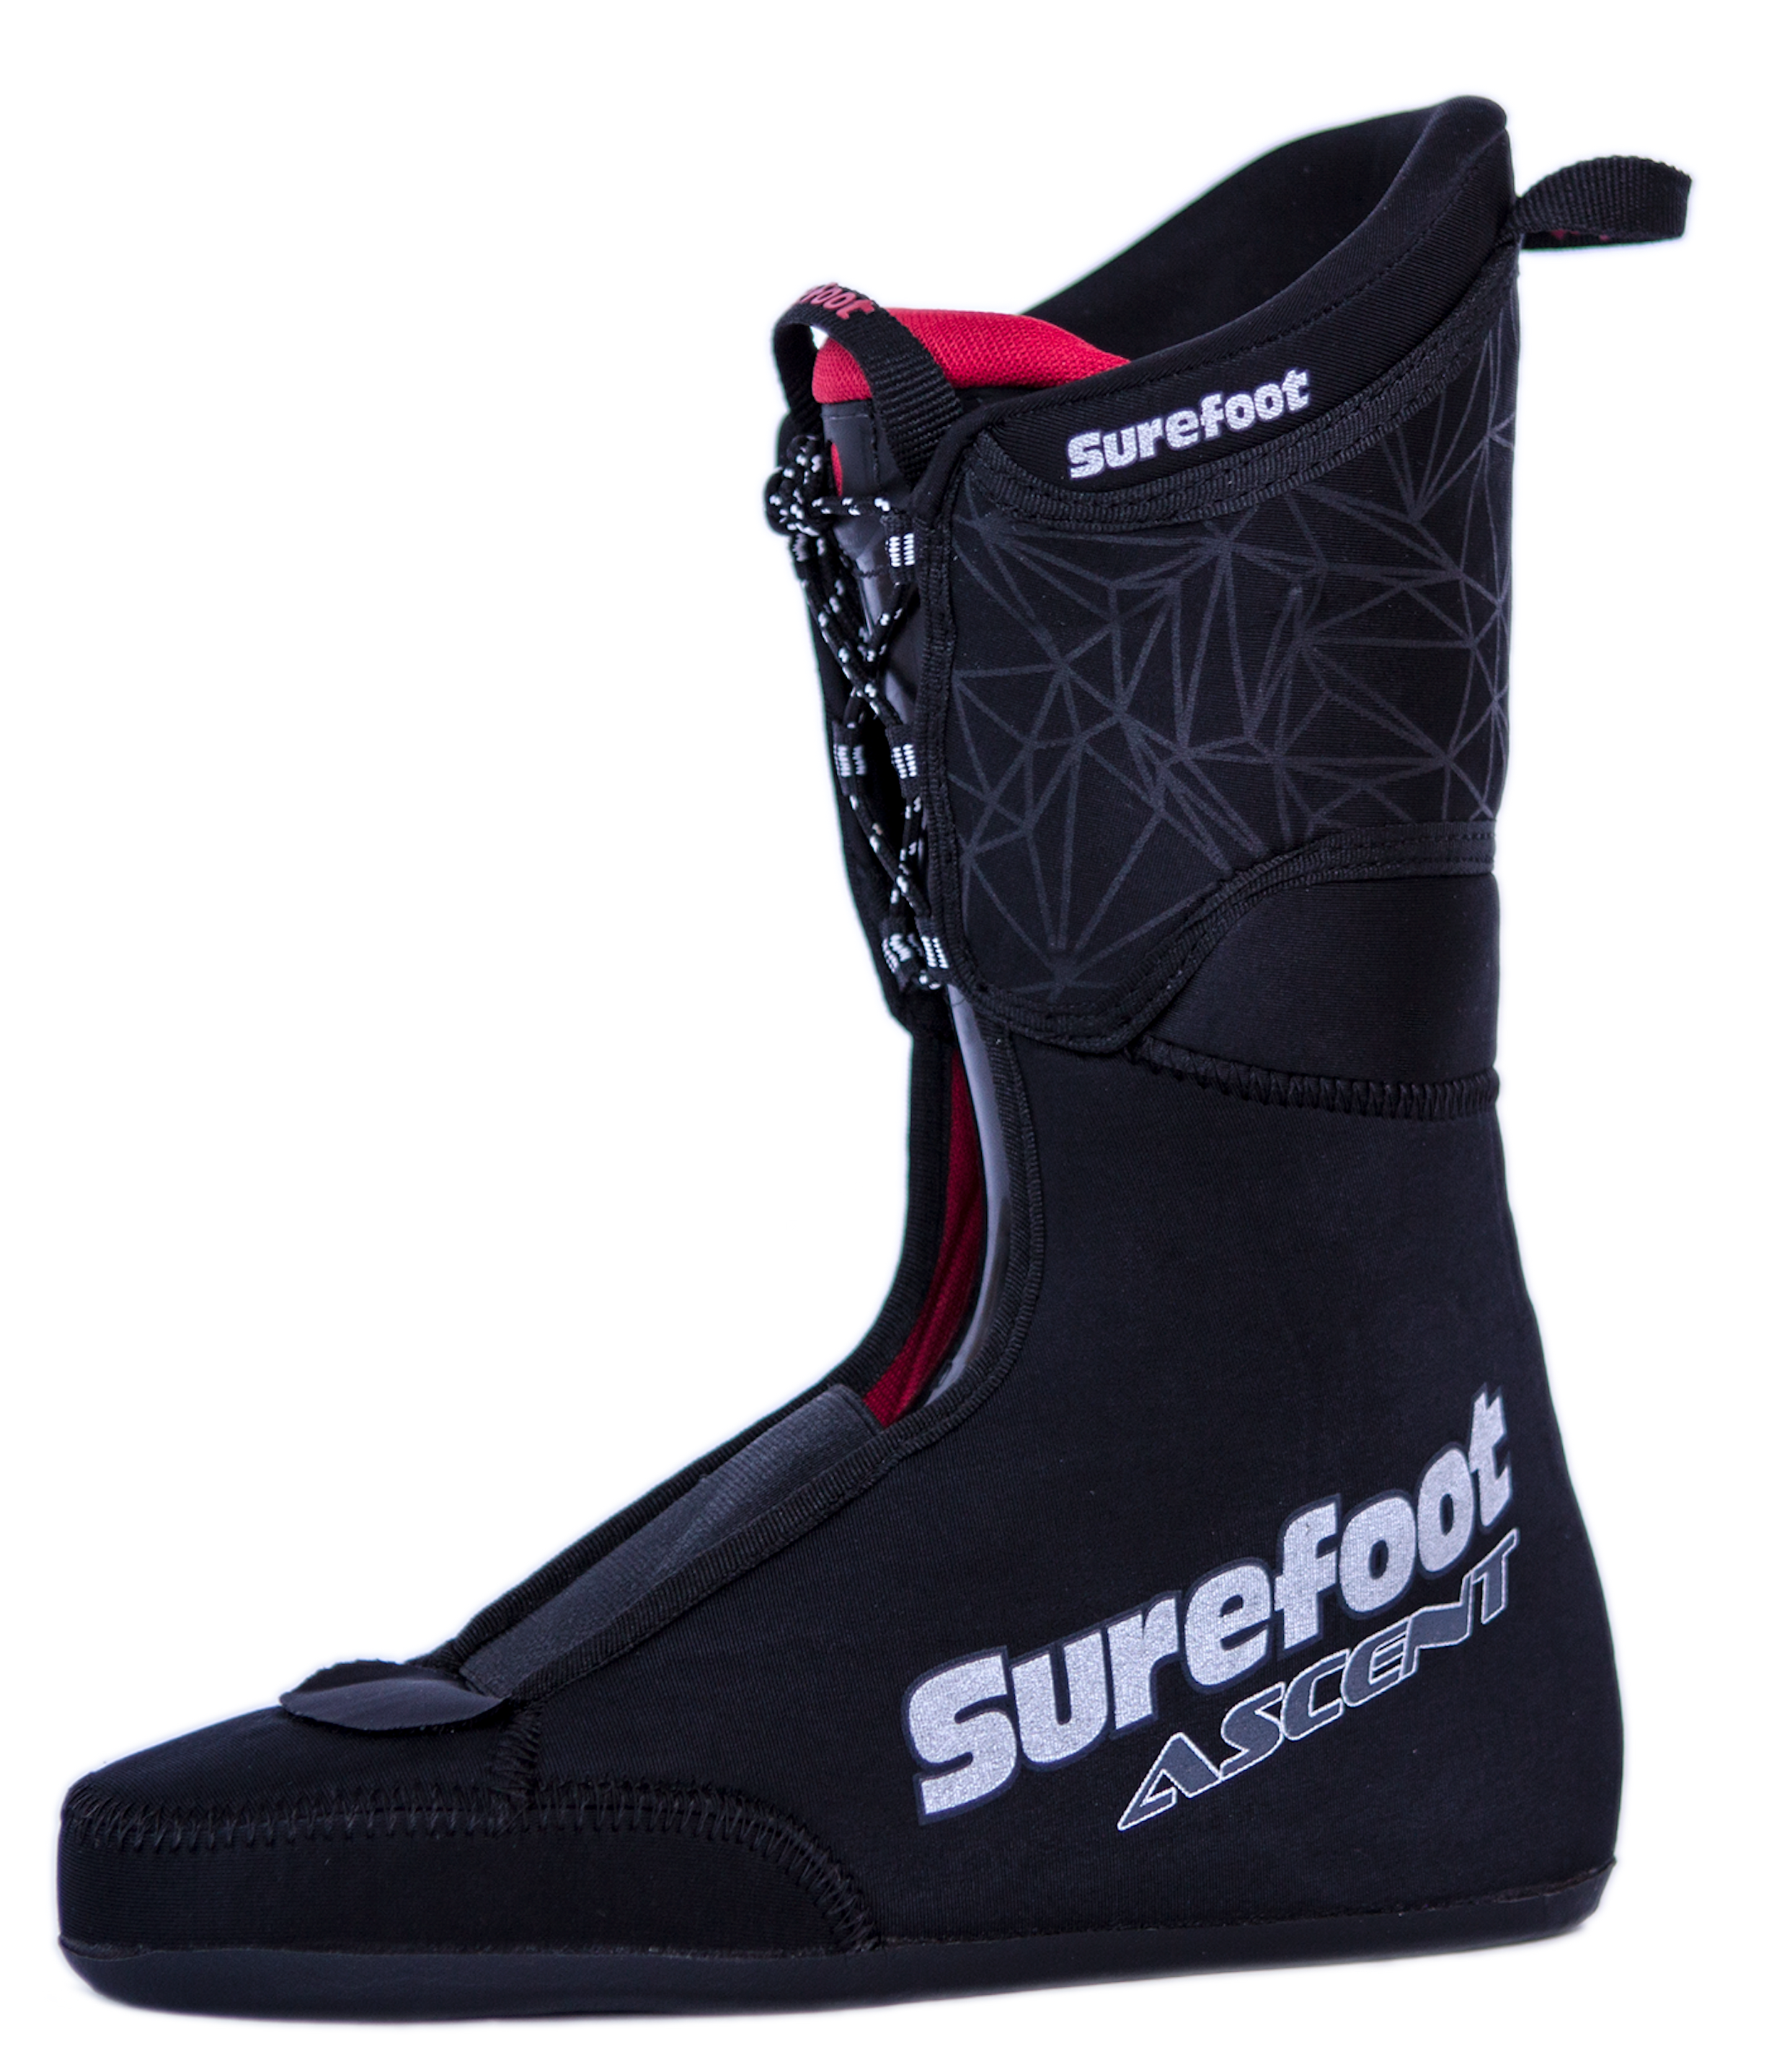 Black Surefoot Ascent Custom Alpine Touring Liner, lace up, no plastic tubes, heat molded instead of foam injected for lightweight.